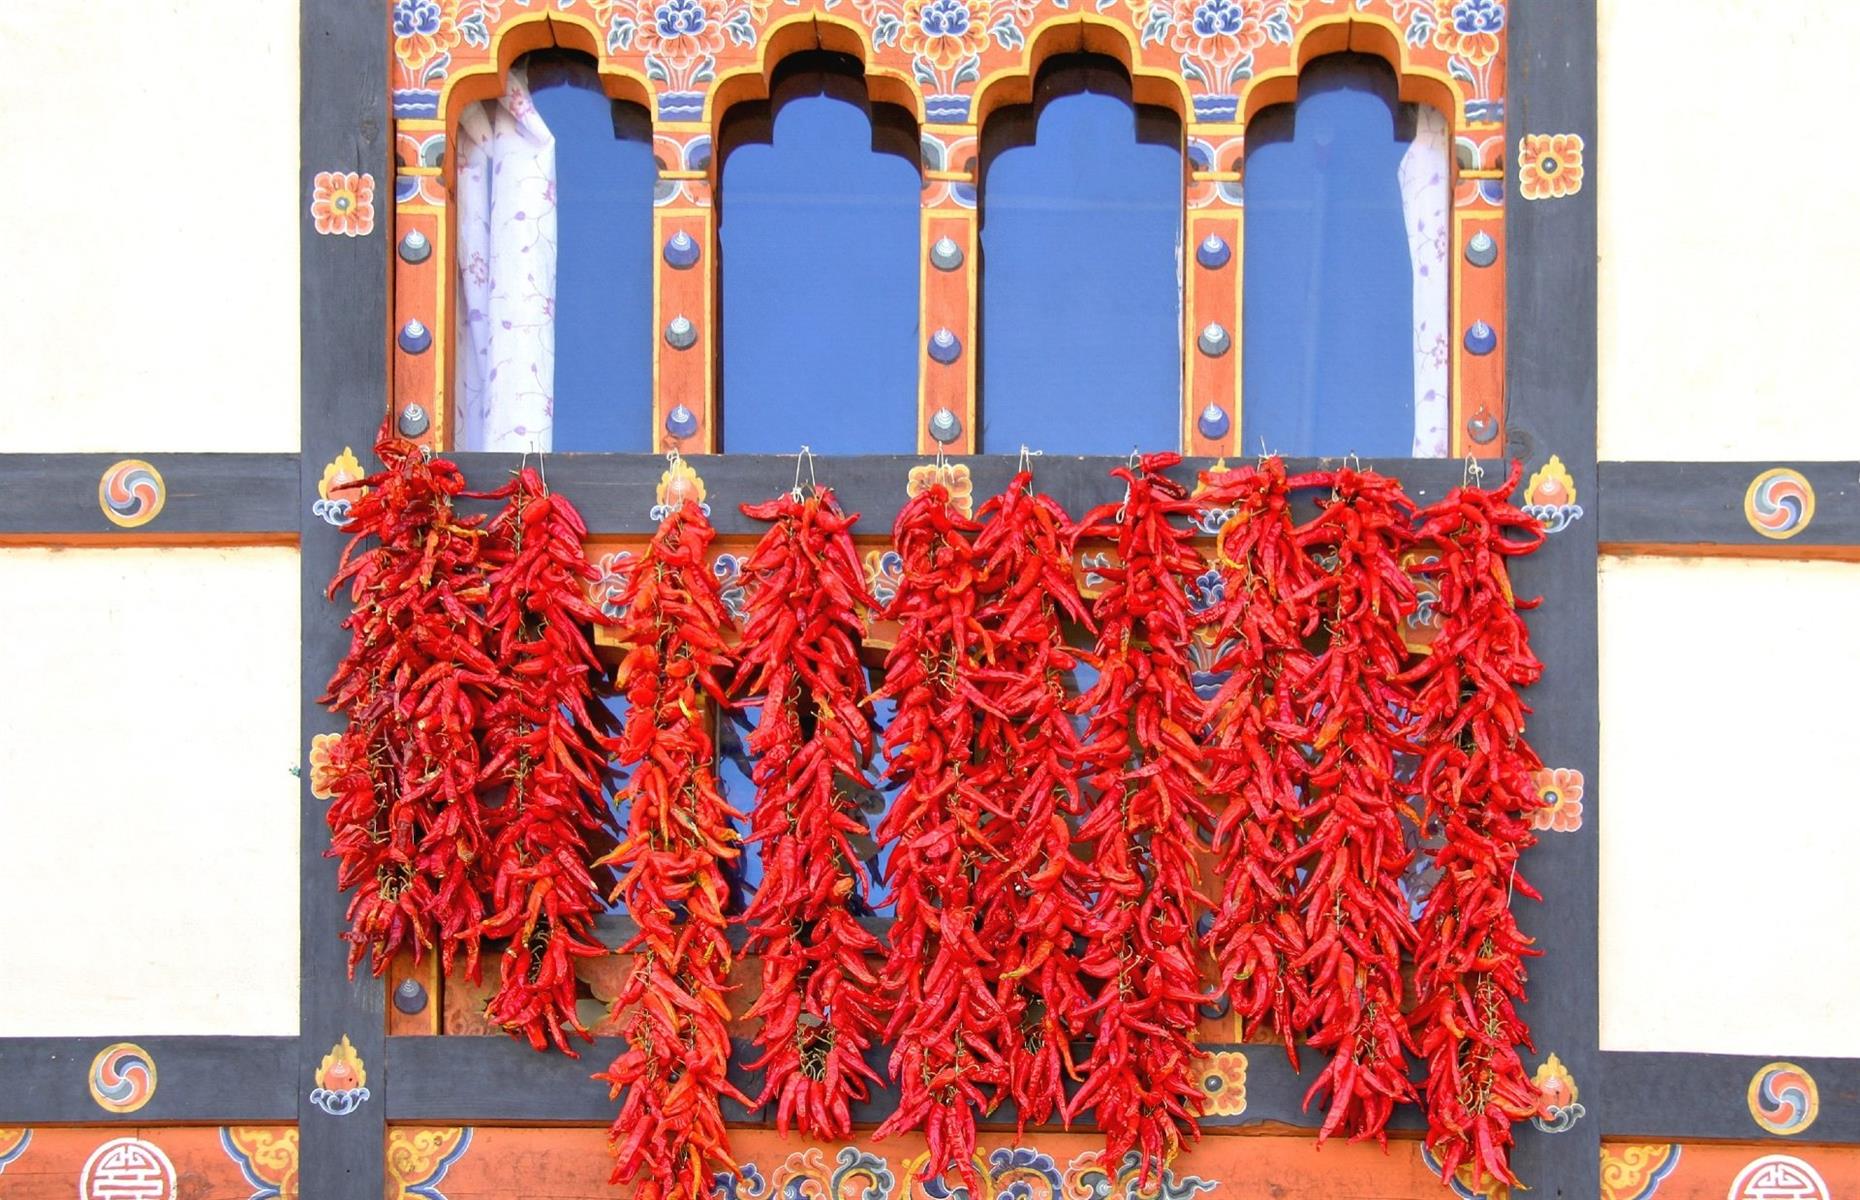 <p>If there’s one food mantra the Bhutanese live by, it’s that spice is king. Influenced by Tibetan, Chinese, Nepalese and Indian cooking, the food in Bhutan is richly flavourful, but it can also be very spicy due to a nationwide love of chilli peppers. While you can try milder, tourist-friendly versions of regional favourites in lots of places, we recommend sampling an authentic (and super-hot) taste of what the locals eat at least once, whether it’s jasha maru chicken stew, or the nation's signature dish, ema datshi – a chilli cheese that’s so beloved, it comes with almost every meal.</p>